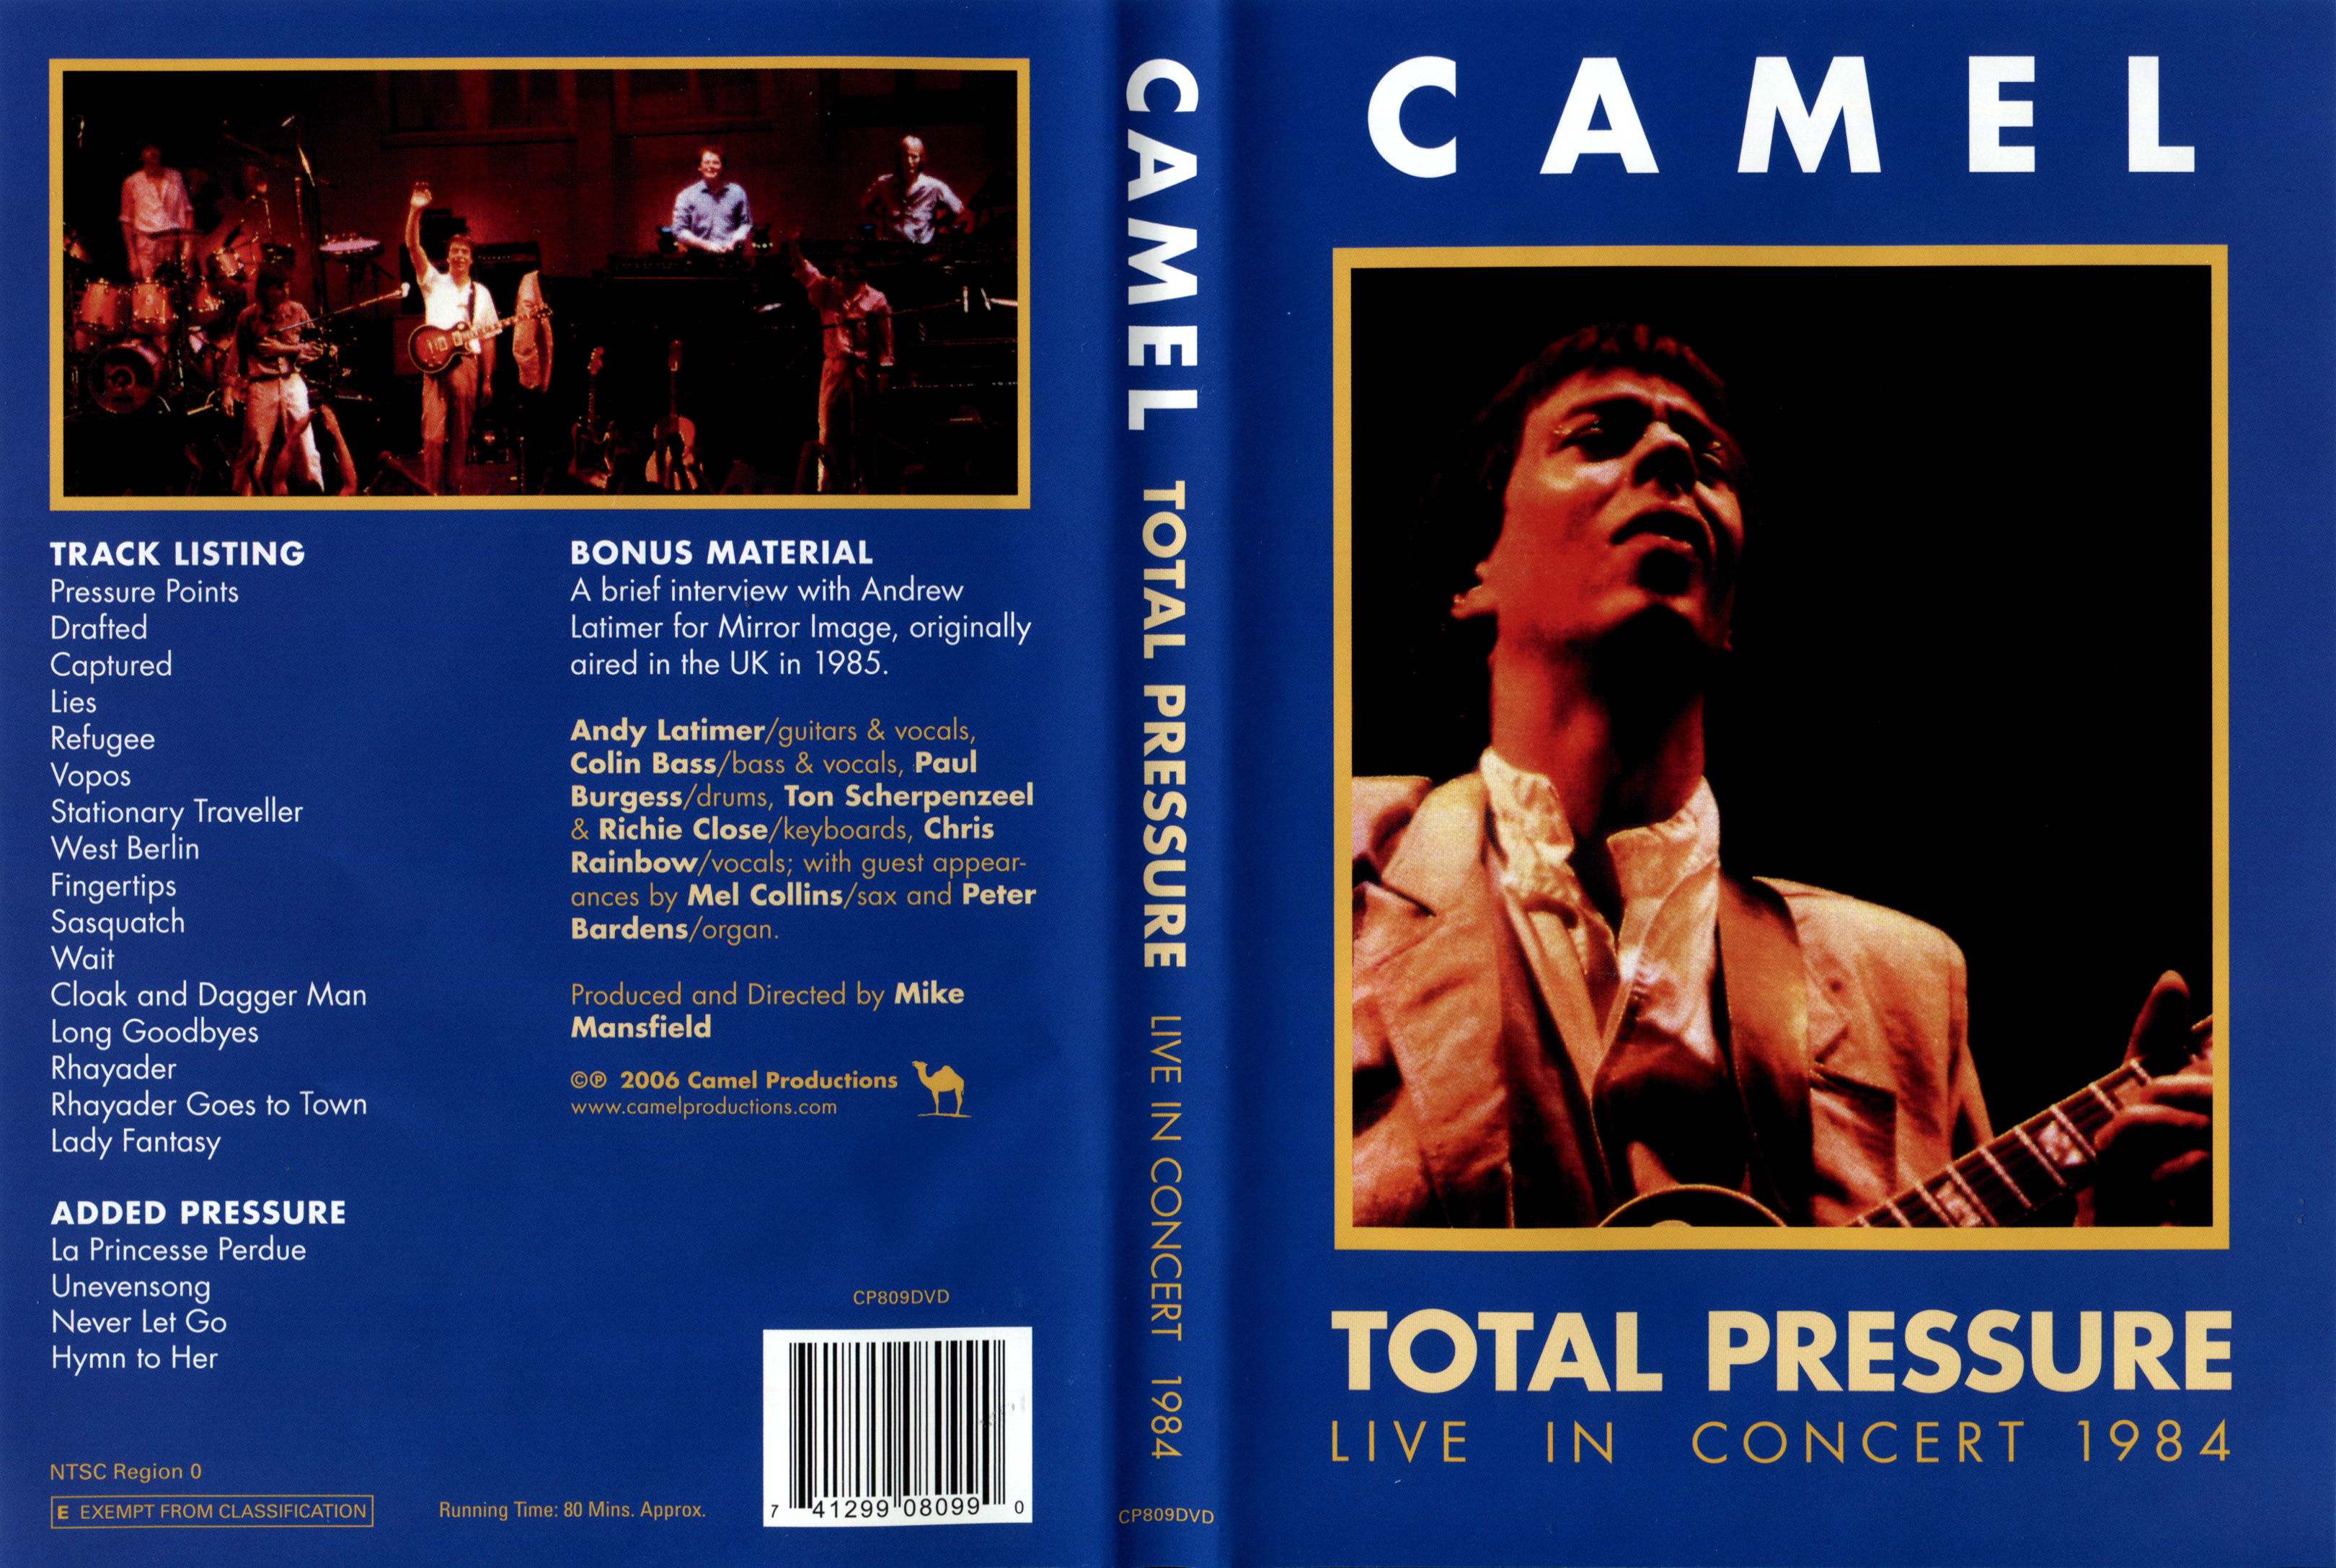 Camel - Total Pressure 1984 Audio only